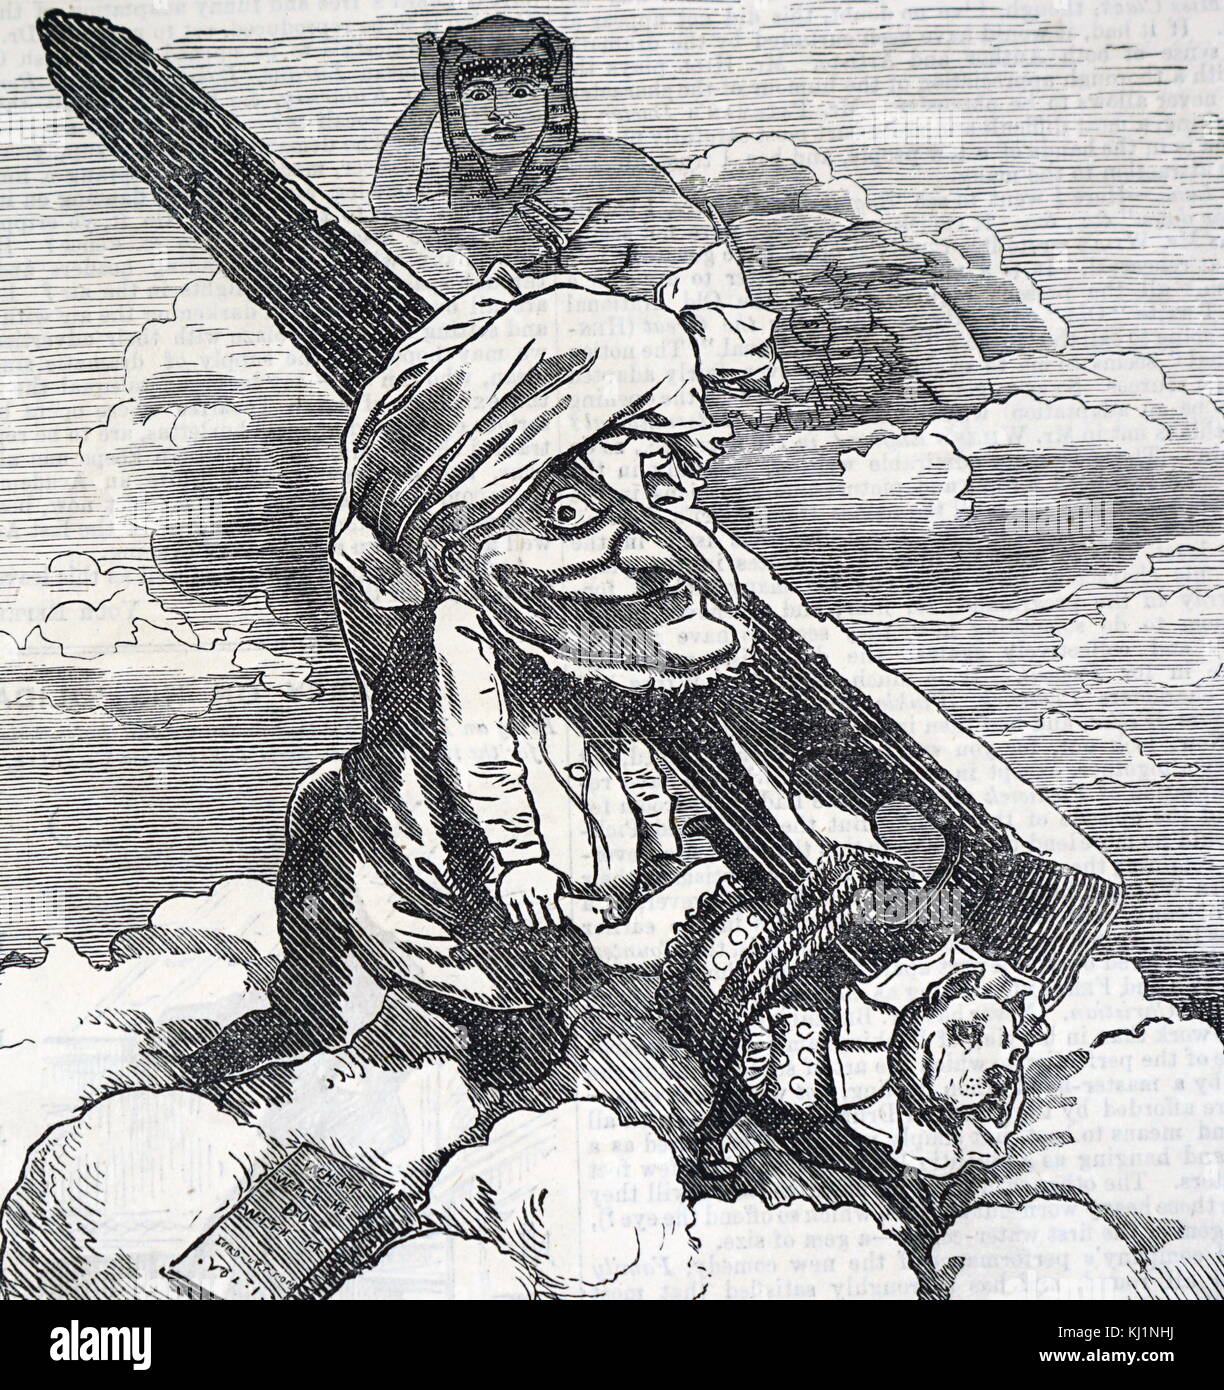 Cartoon depicting the departure of Cleopatra's Needle from Egypt to be given to the British Government by Muhammad Ali of Egypt. Muhammad Ali of Egypt (1769-1849) a commander in the Ottoman army, who rose to the rank of Pasha, and became W?li, and self-declared Khedive of Egypt and Sudan. Dated 19th Century Stock Photo